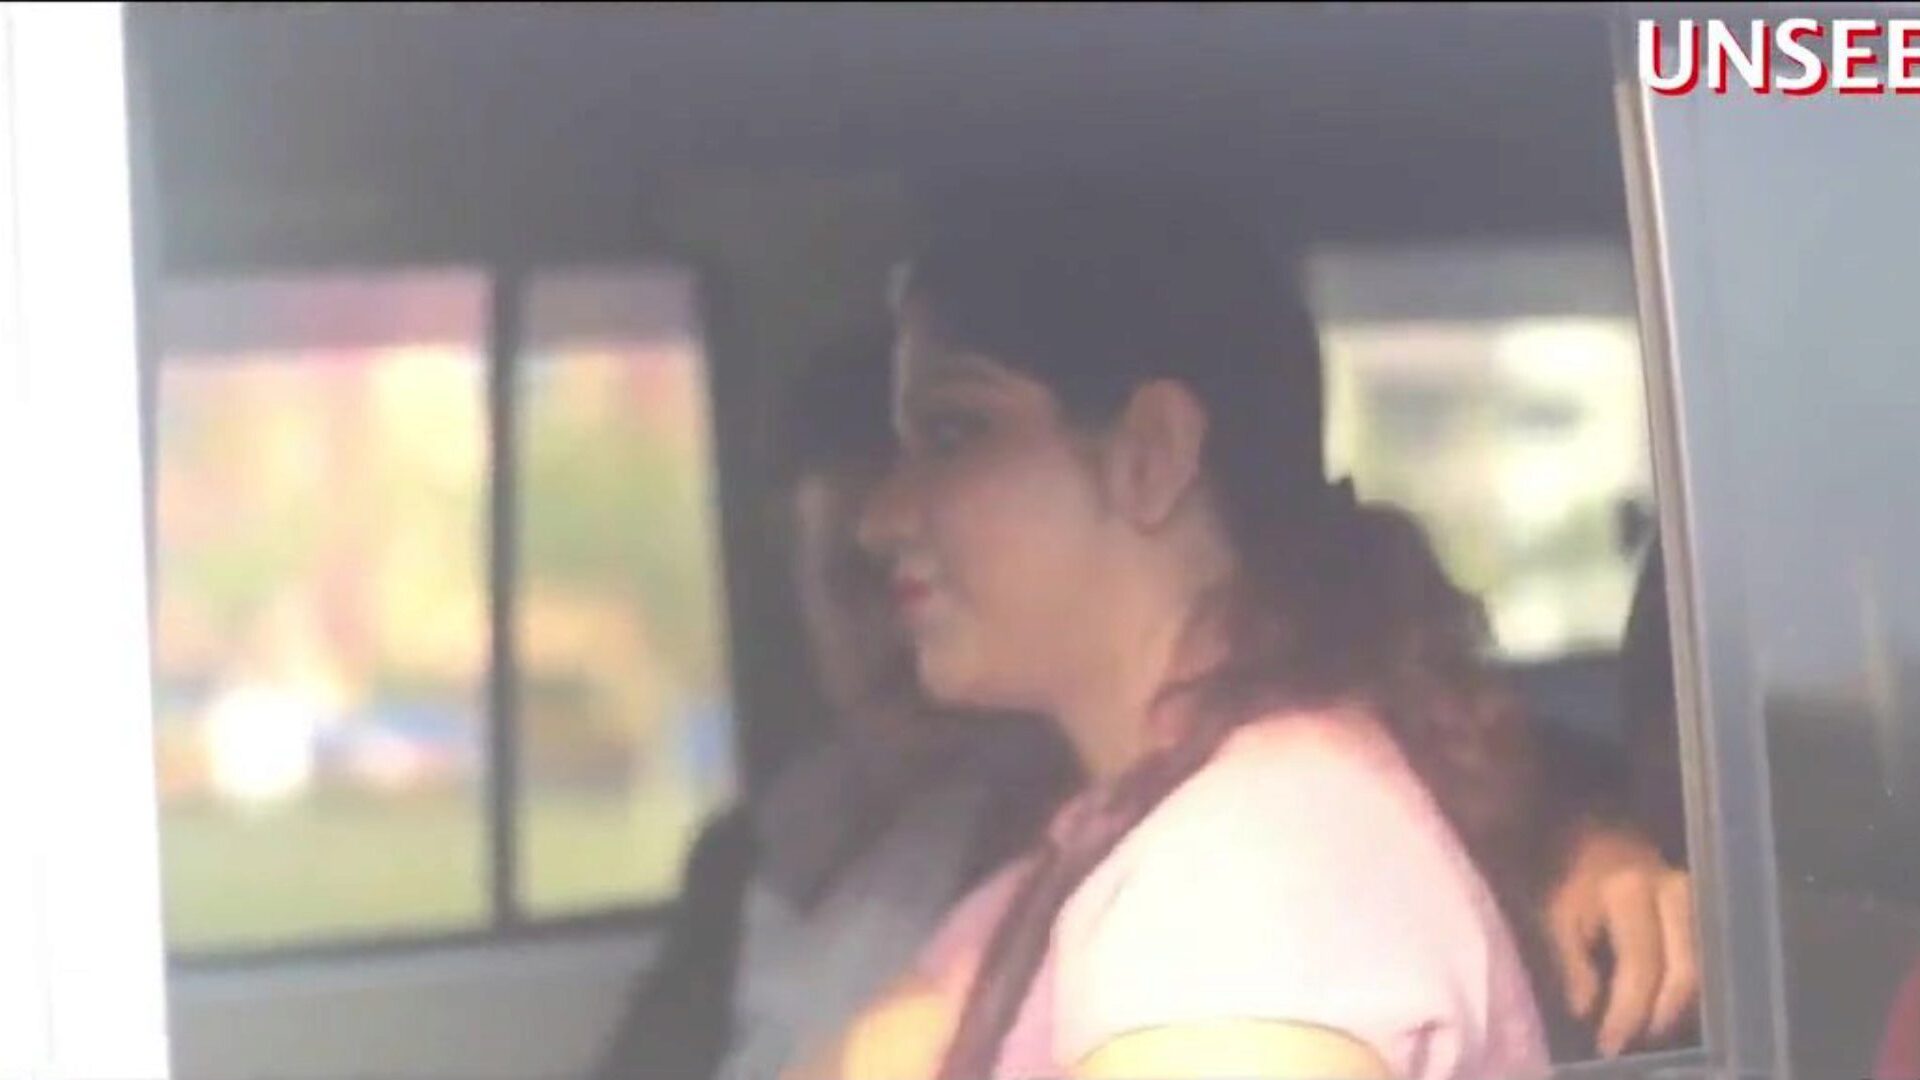 Desi Fuck in Car: Free Indian HD Porn Video 3d - xHamster Watch Desi Fuck in Car tube fuckfest video for free on xHamster, with the sexiest bevy of Asian Indian, Desi Online & Xnxx Desi HD porn clip gigs